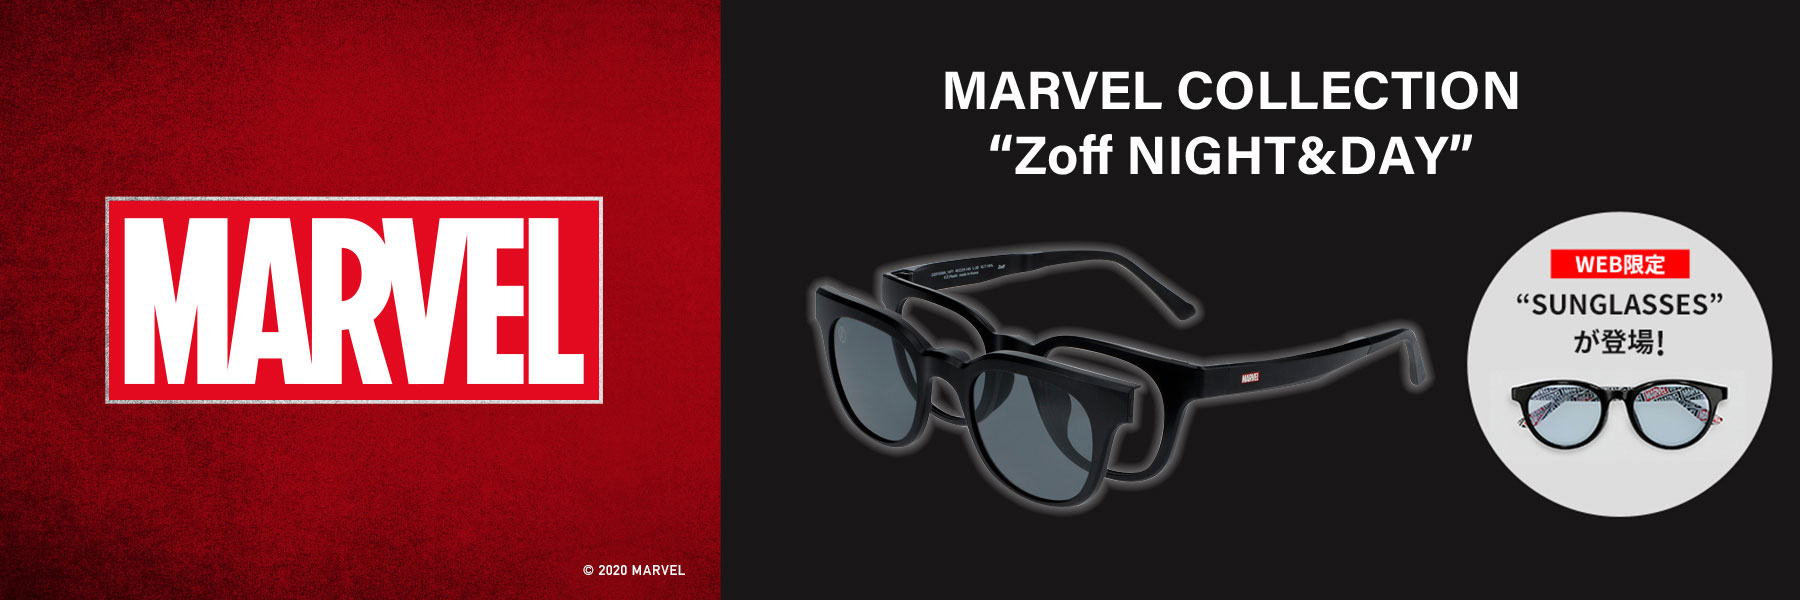 MARVEL COLLECTION “Zoff NIGHT&DAY”